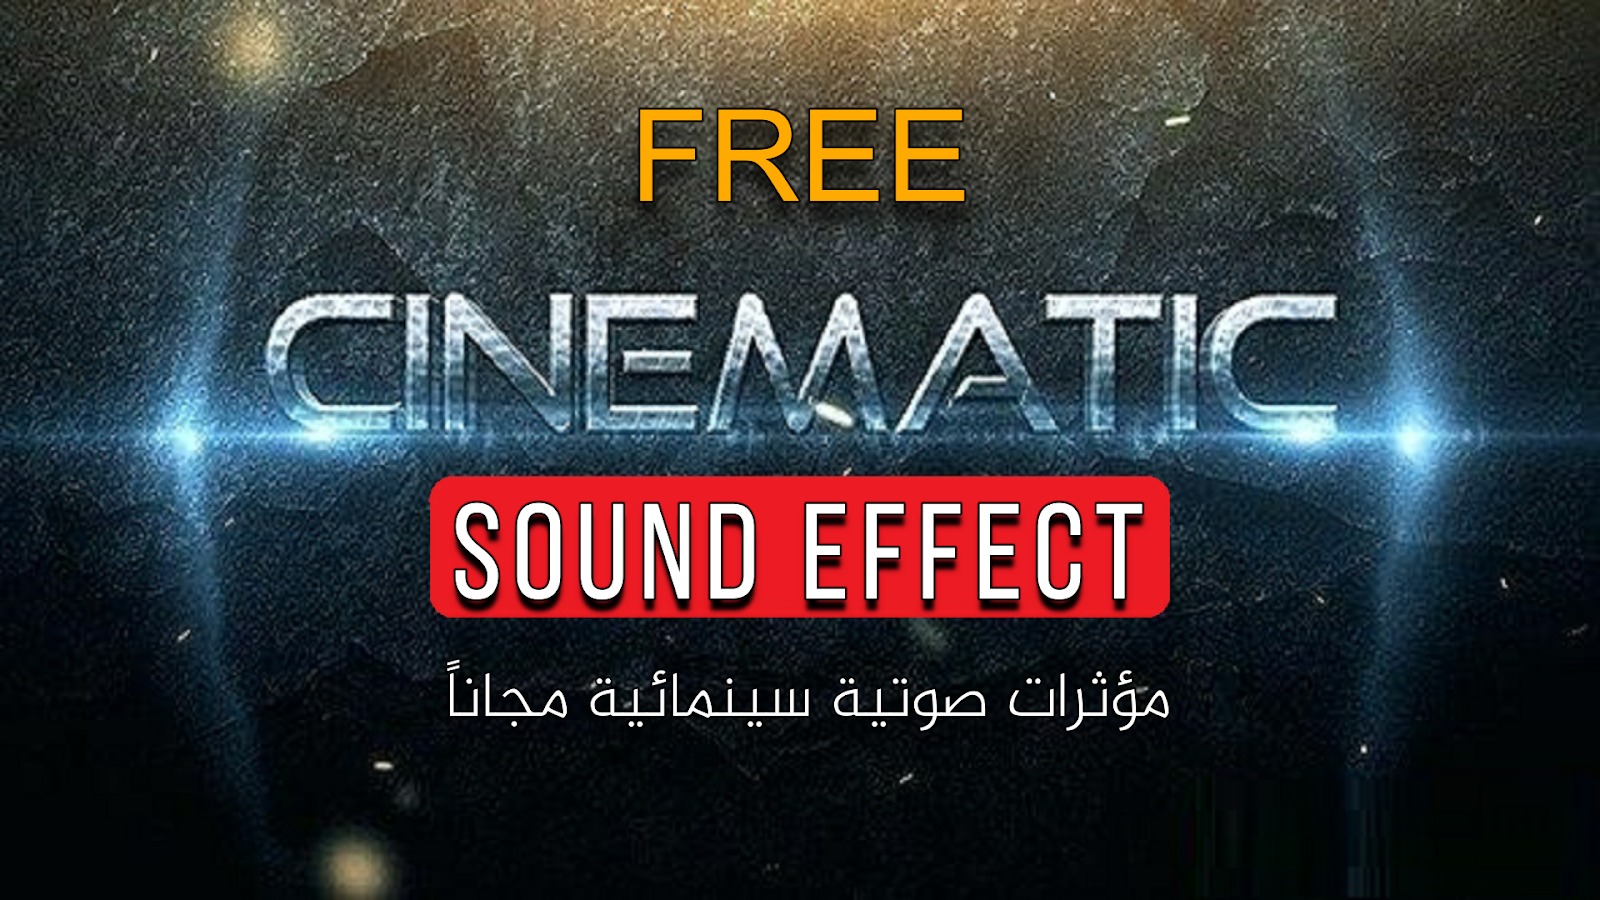 cinematic sound effects free